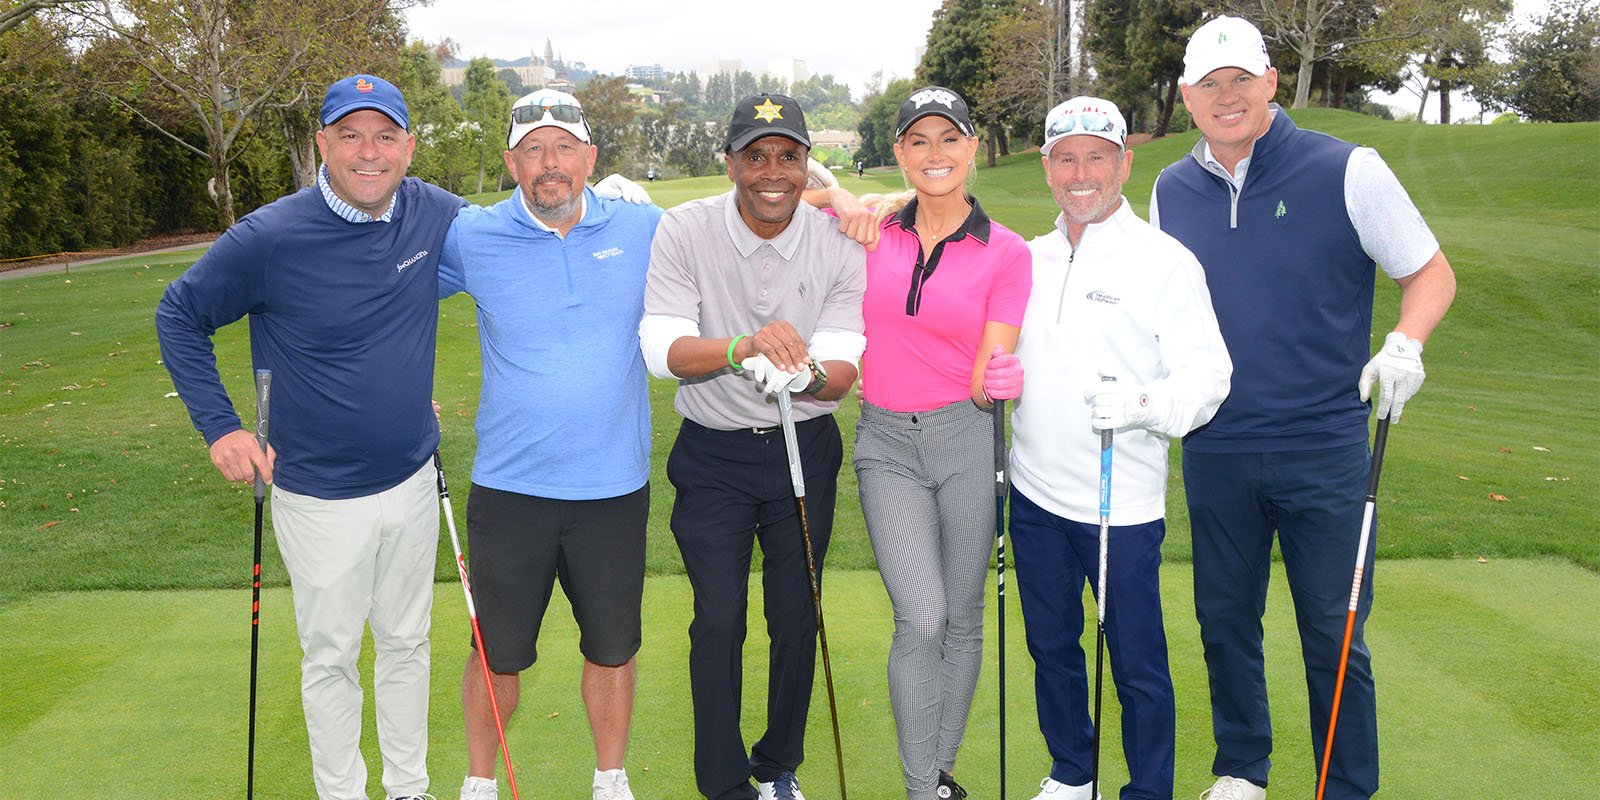   16th Annual George Lopez Celebrity Golf Classic    GOLF TOURNAMENT    SEE HIGHLIGHTS  